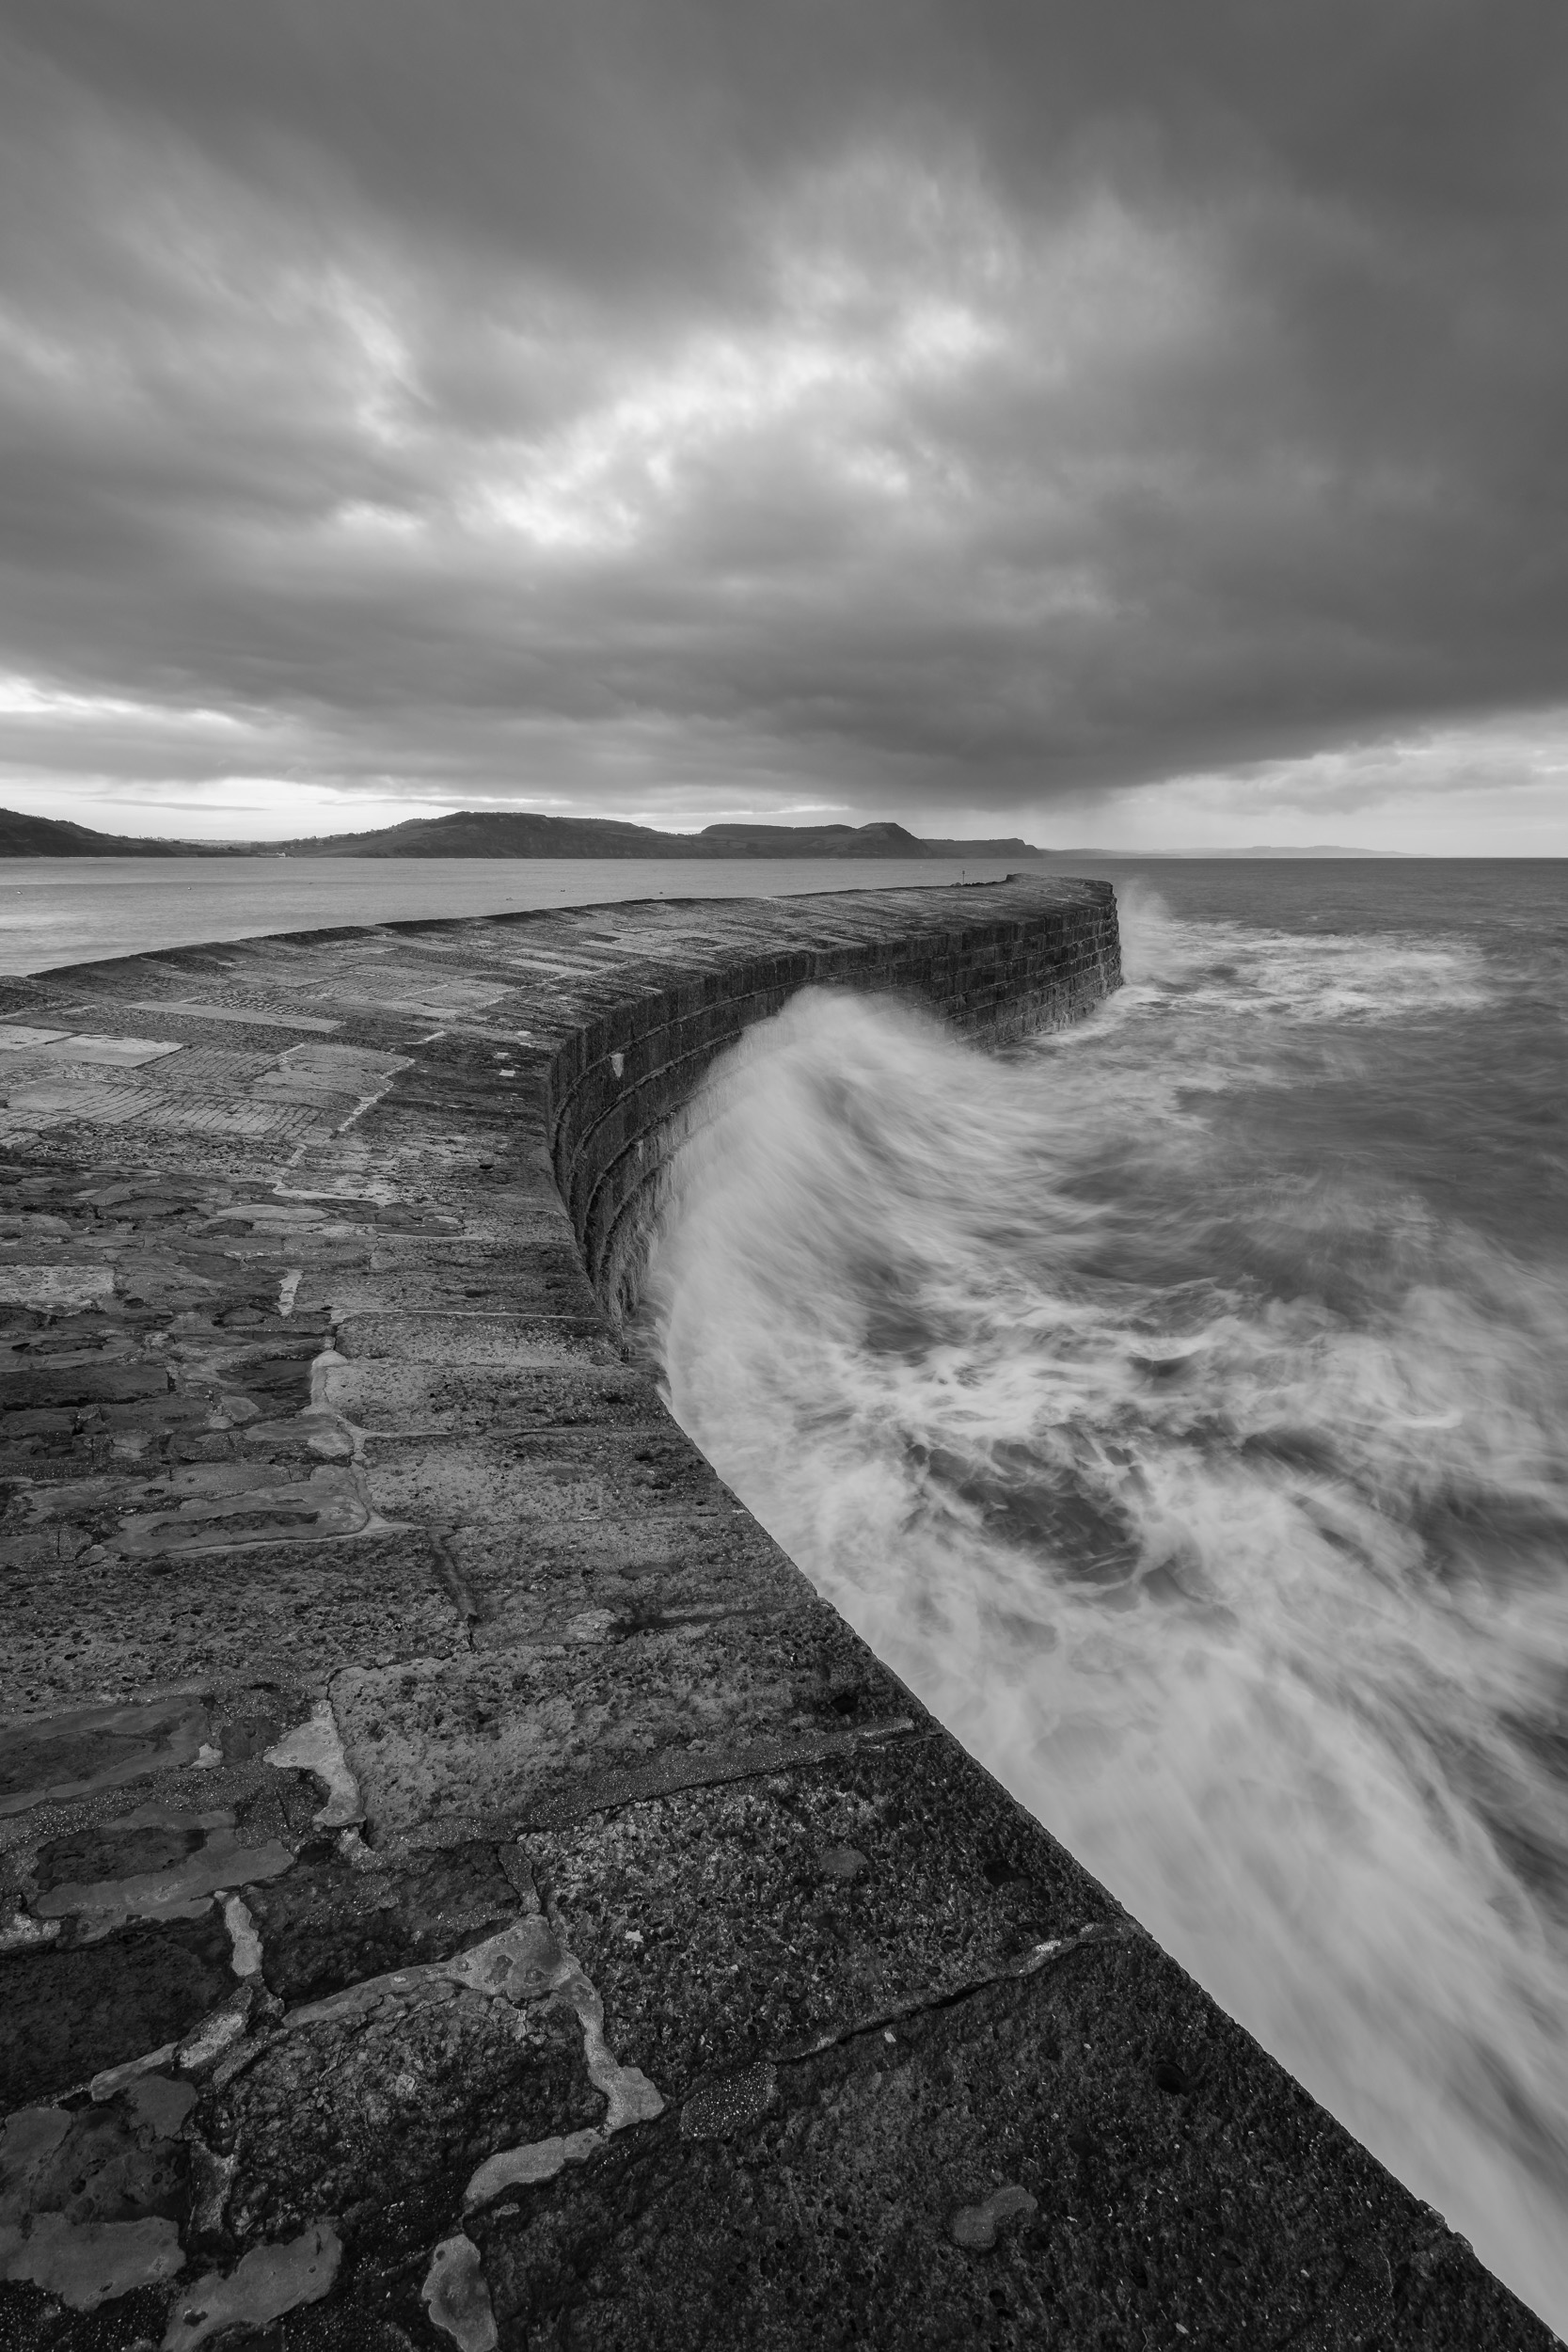 The Harbour Wall at Lyme Regis